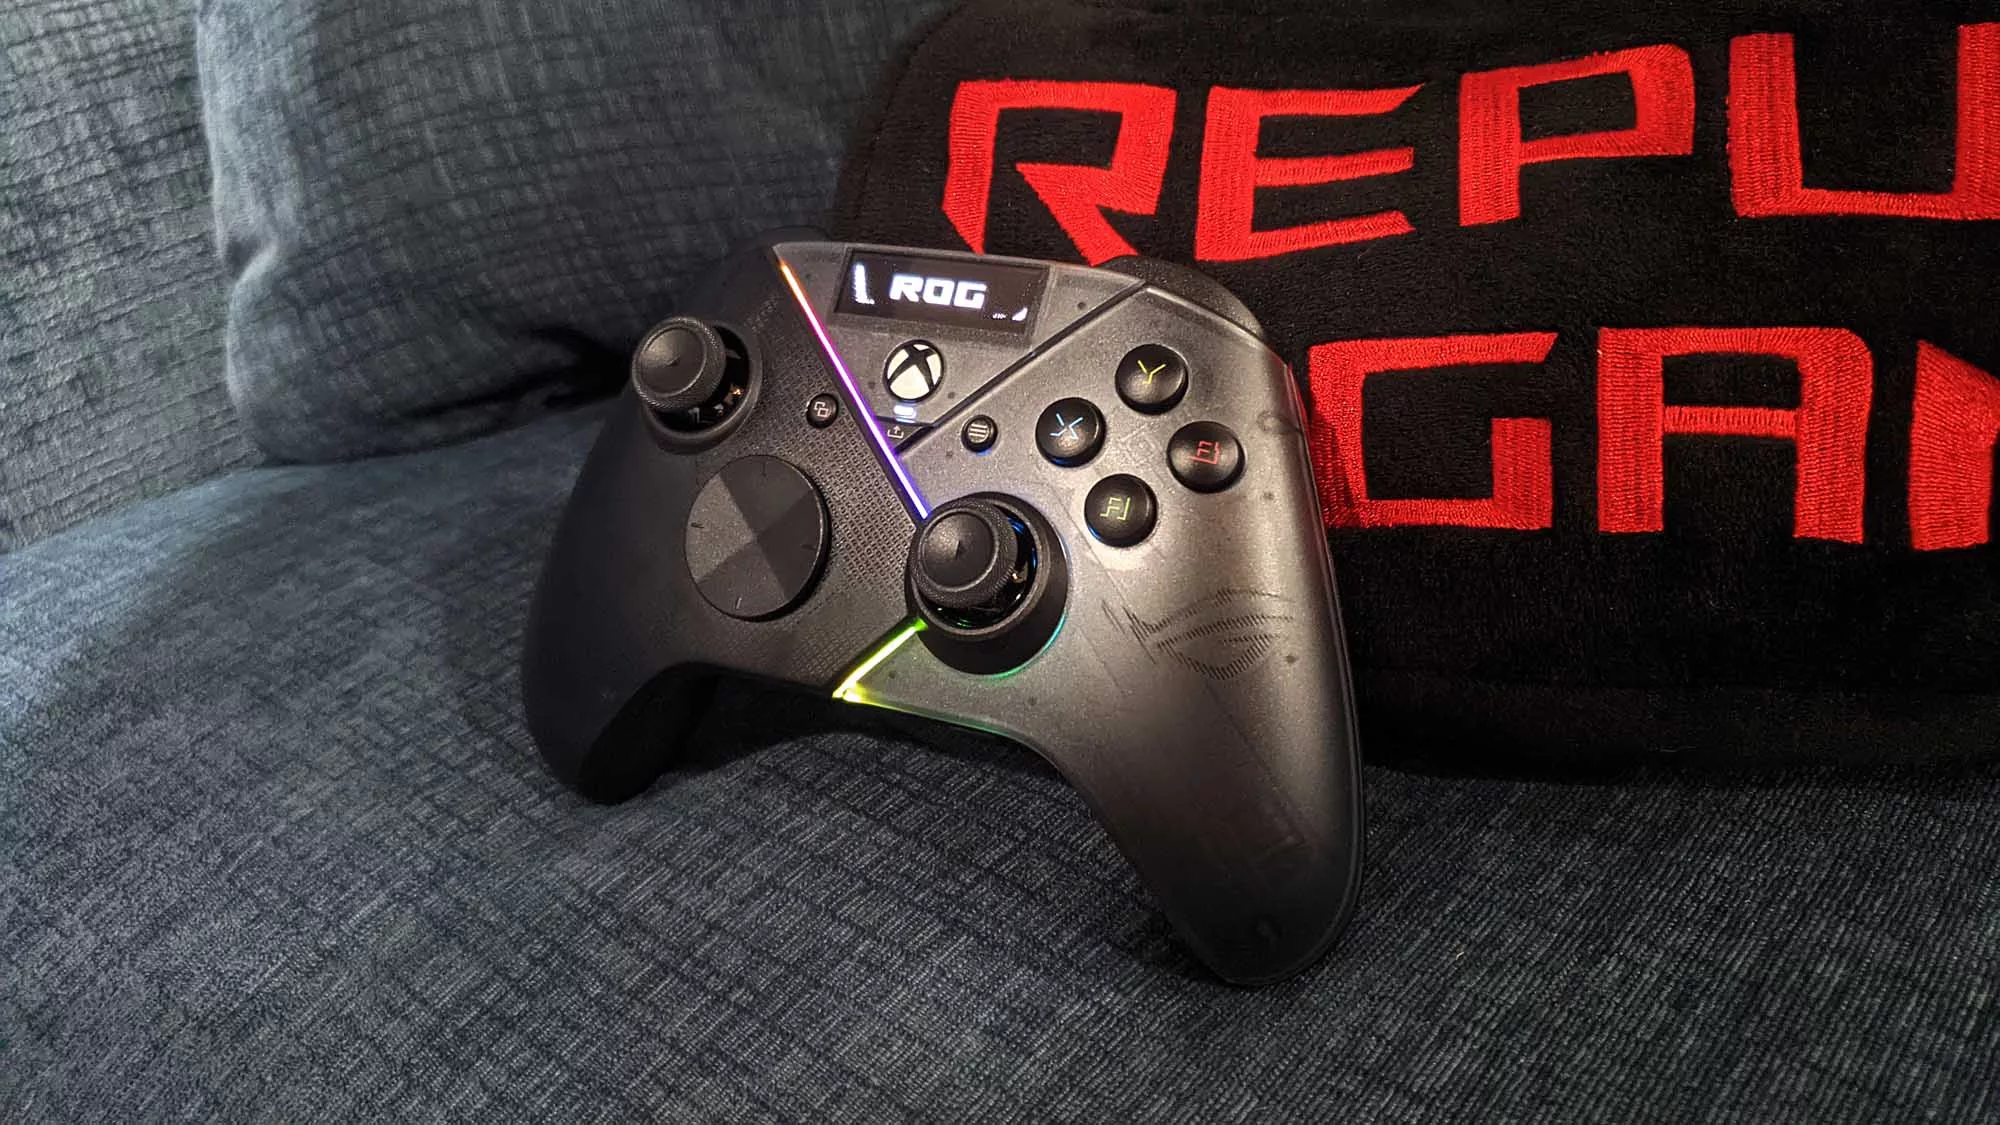 Front view of the ROG Raikiri Pro controller on a couch.